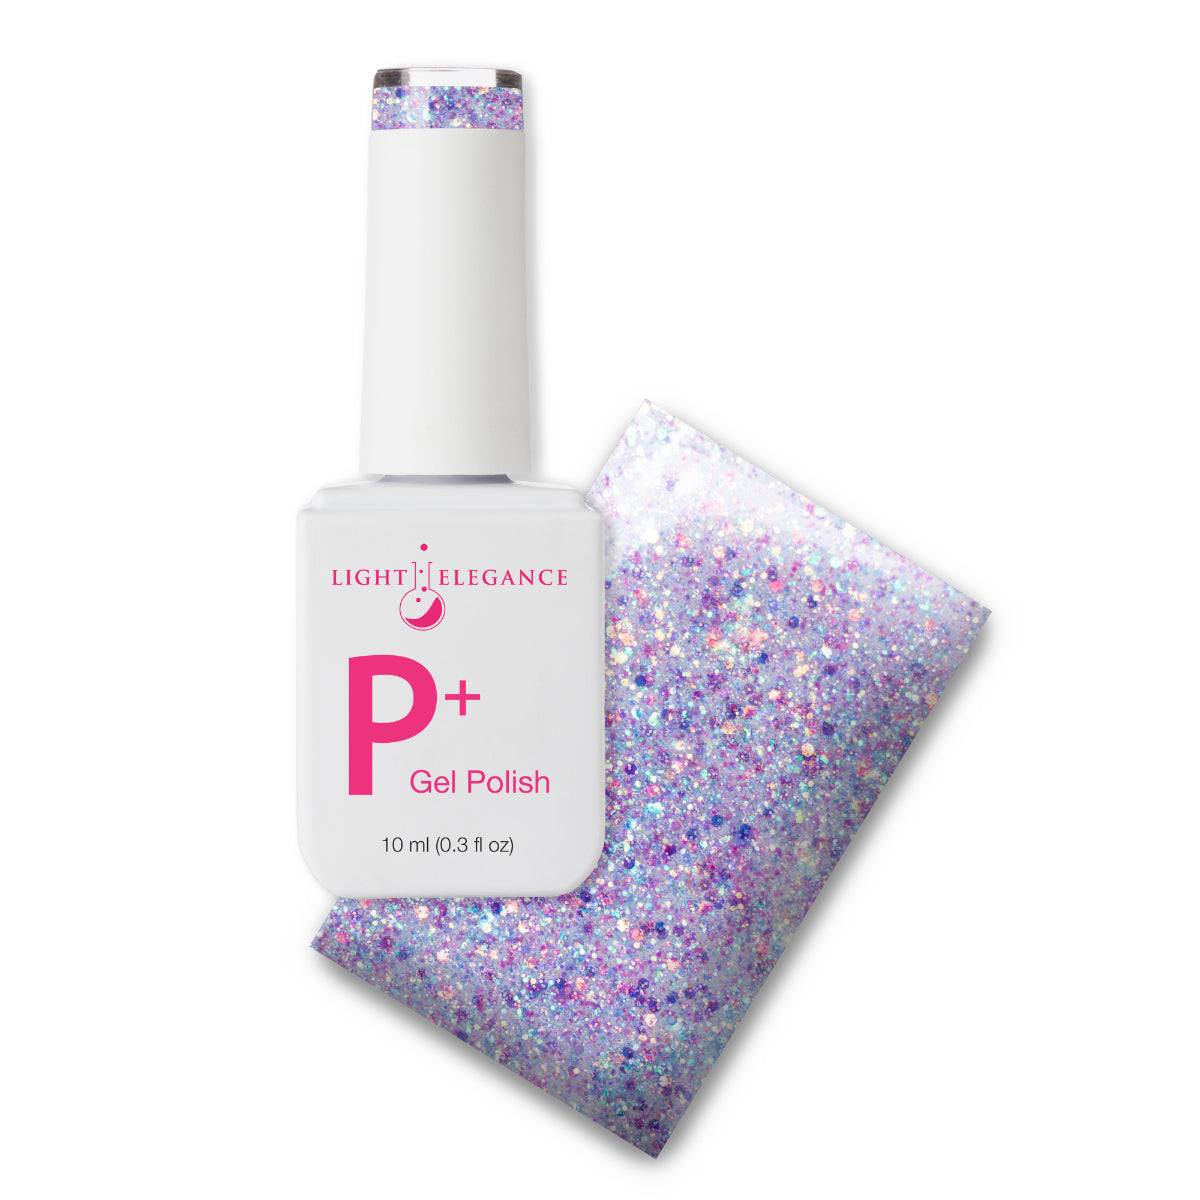 Light Elegance P+ Soak Off Glitter Gel - In My Happy Place :: New Packaging - Creata Beauty - Professional Beauty Products